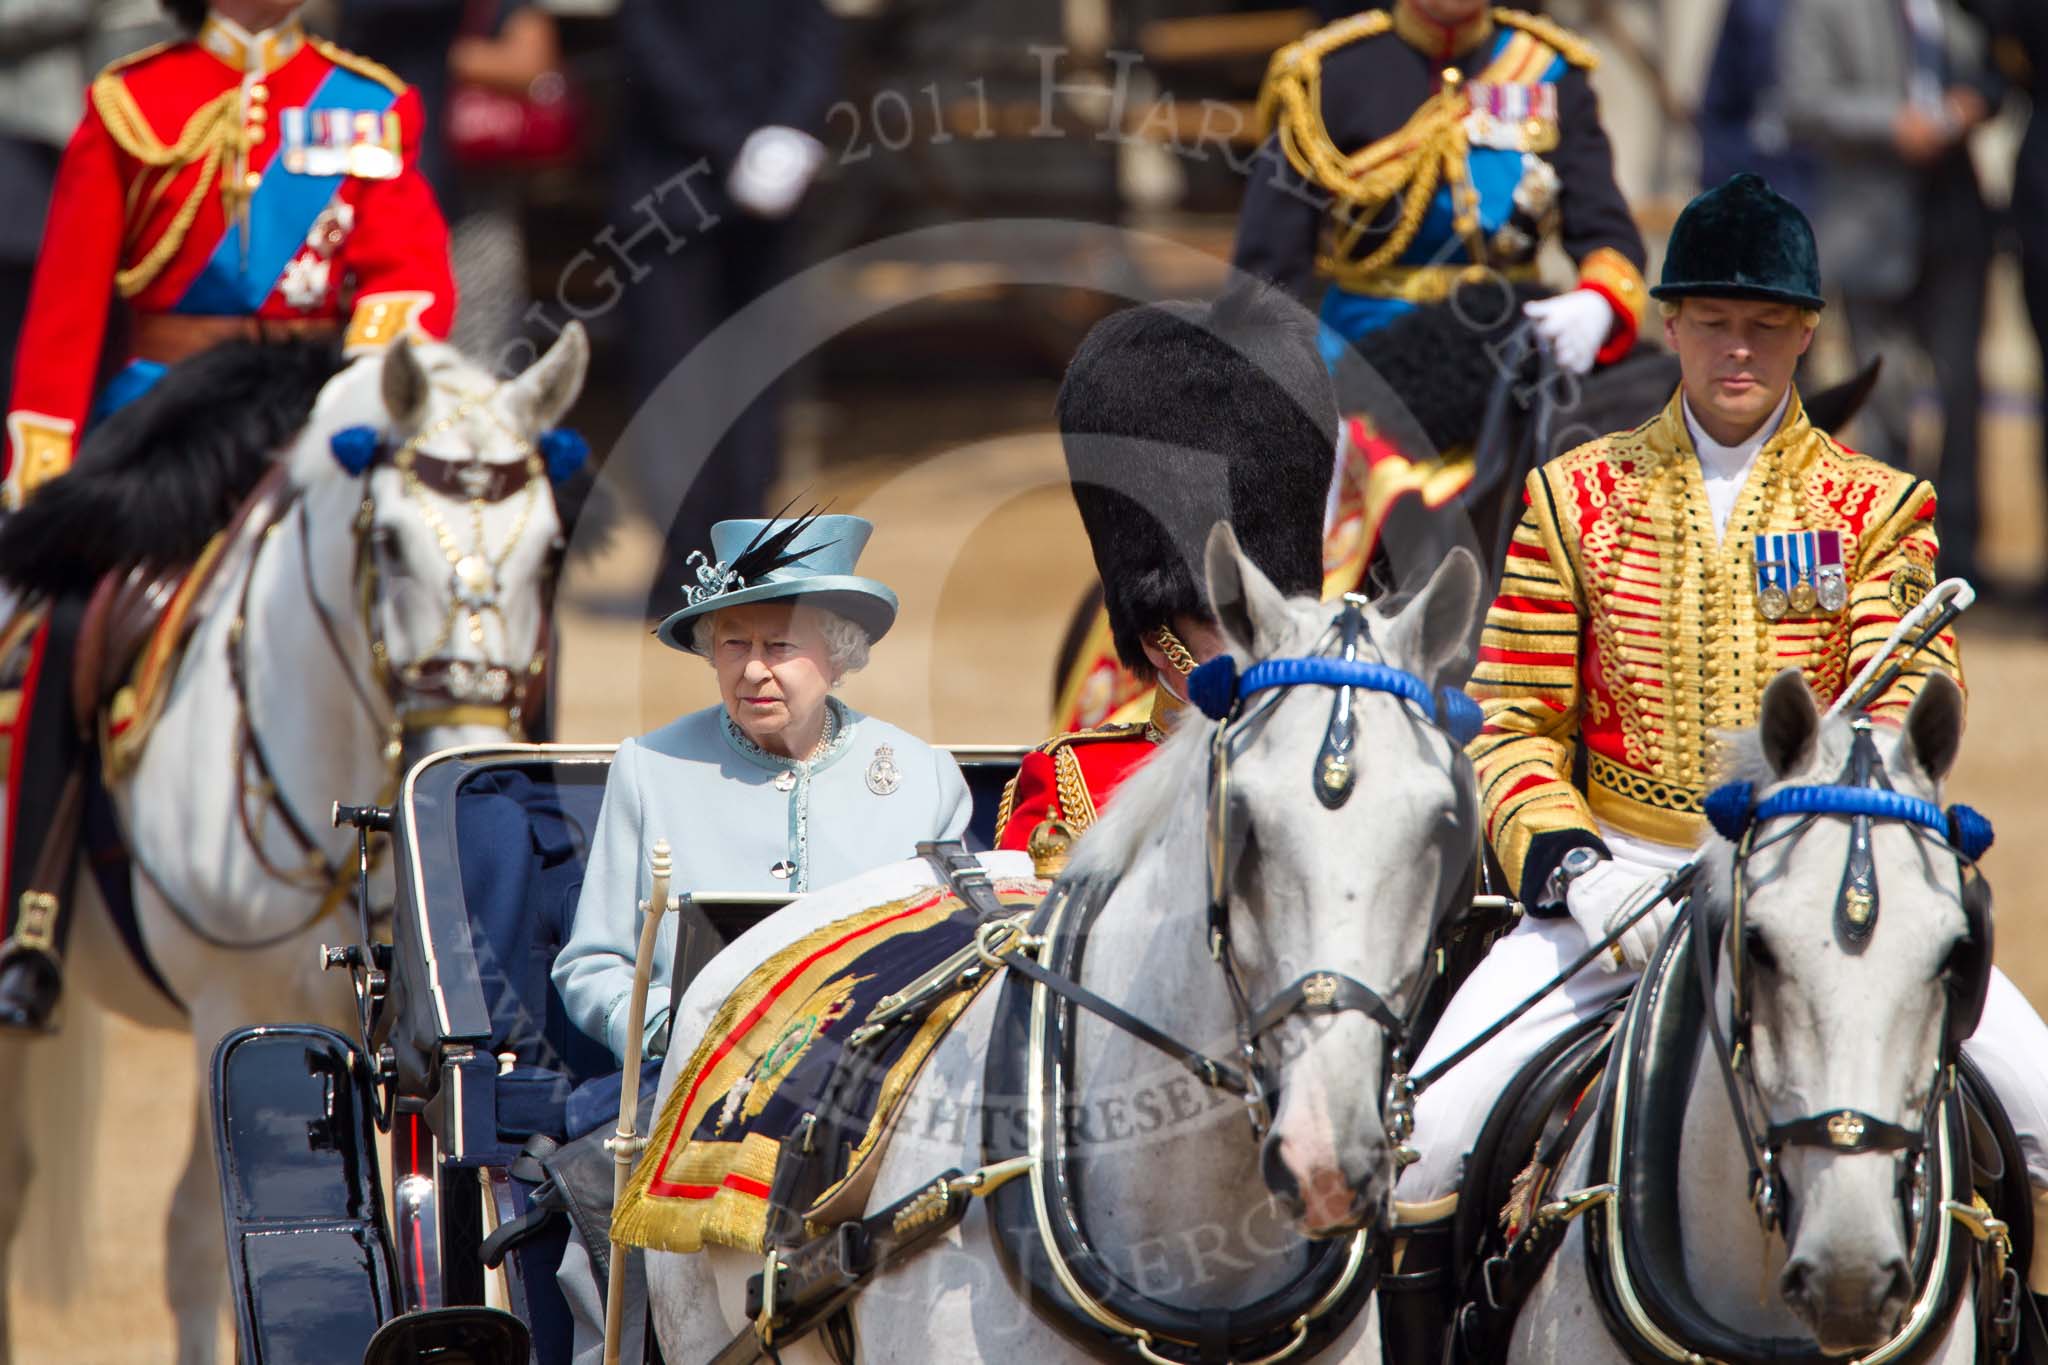 Trooping the Colour 2011: Her Majesty The Queen with Prince Philip on the ivory mounted phaeton, arriving on Horse Guards Parade. In the foreground head coachman Jack Hargreaves, in the background The Princess Royal and The Duke of Kent as two of the Royal Colonels..
Horse Guards Parade, Westminster,
London SW1,
Greater London,
United Kingdom,
on 11 June 2011 at 10:59, image #126